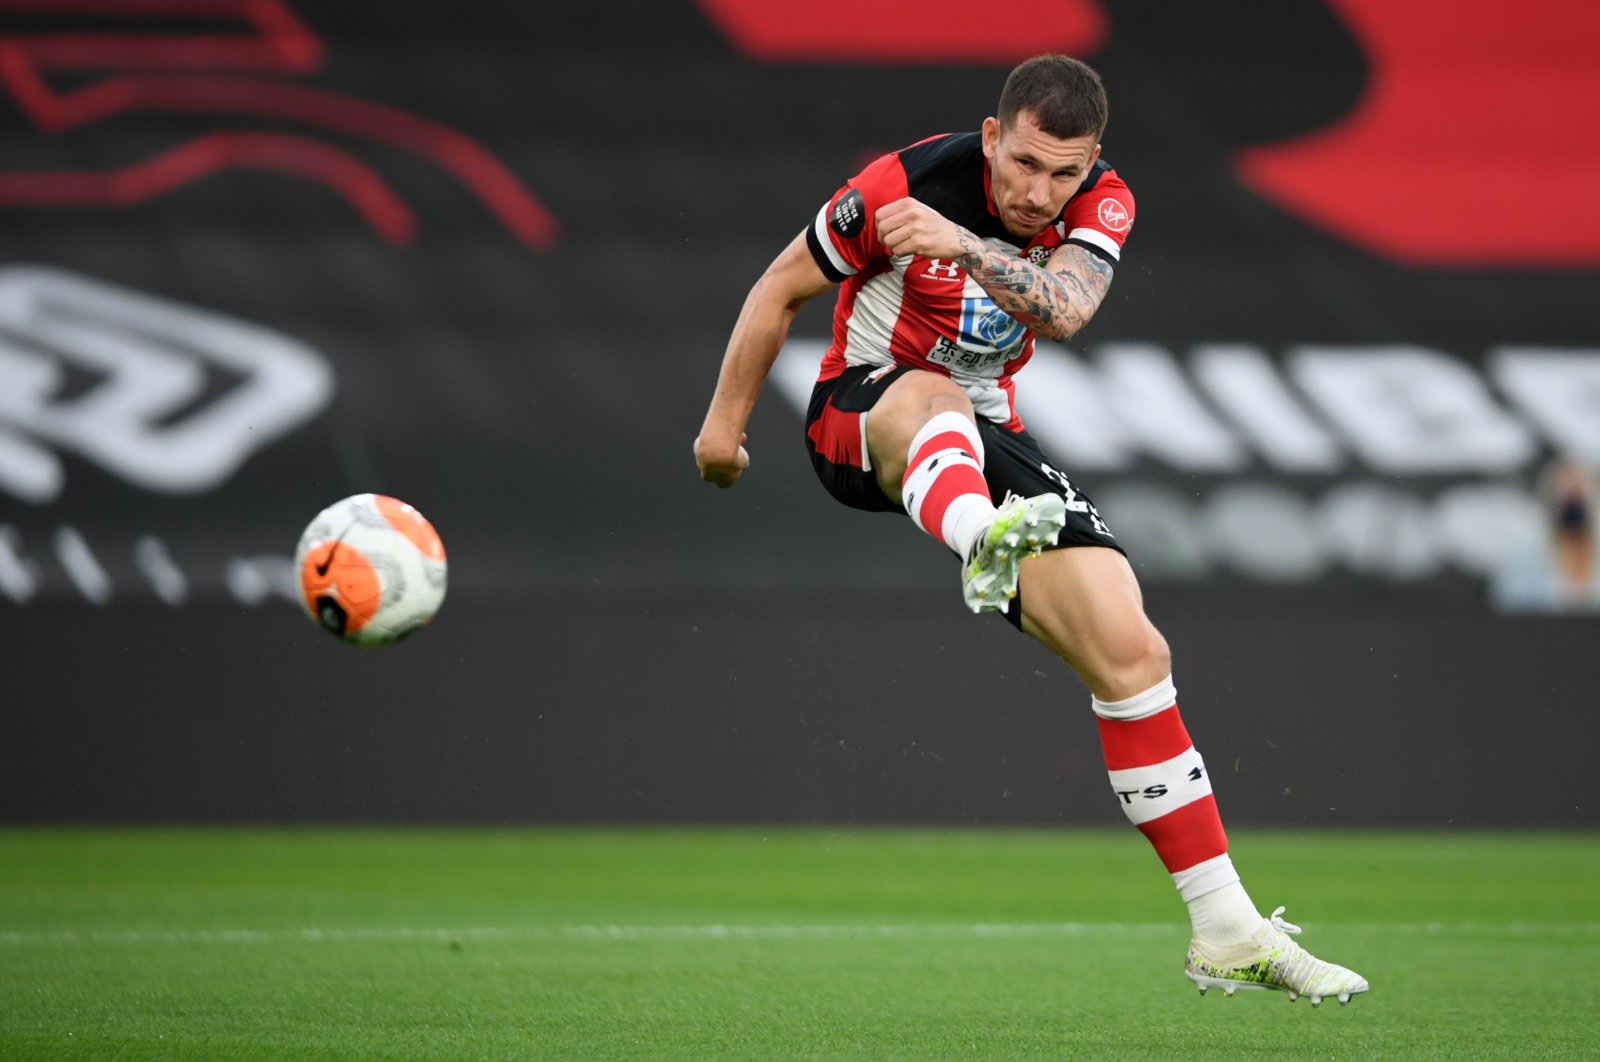 Pierre-Emile Hojbjerg shoots during a Premier League match between Southampton and Brighton in Southampton, England, July 16, 2020. (AFP Photo)